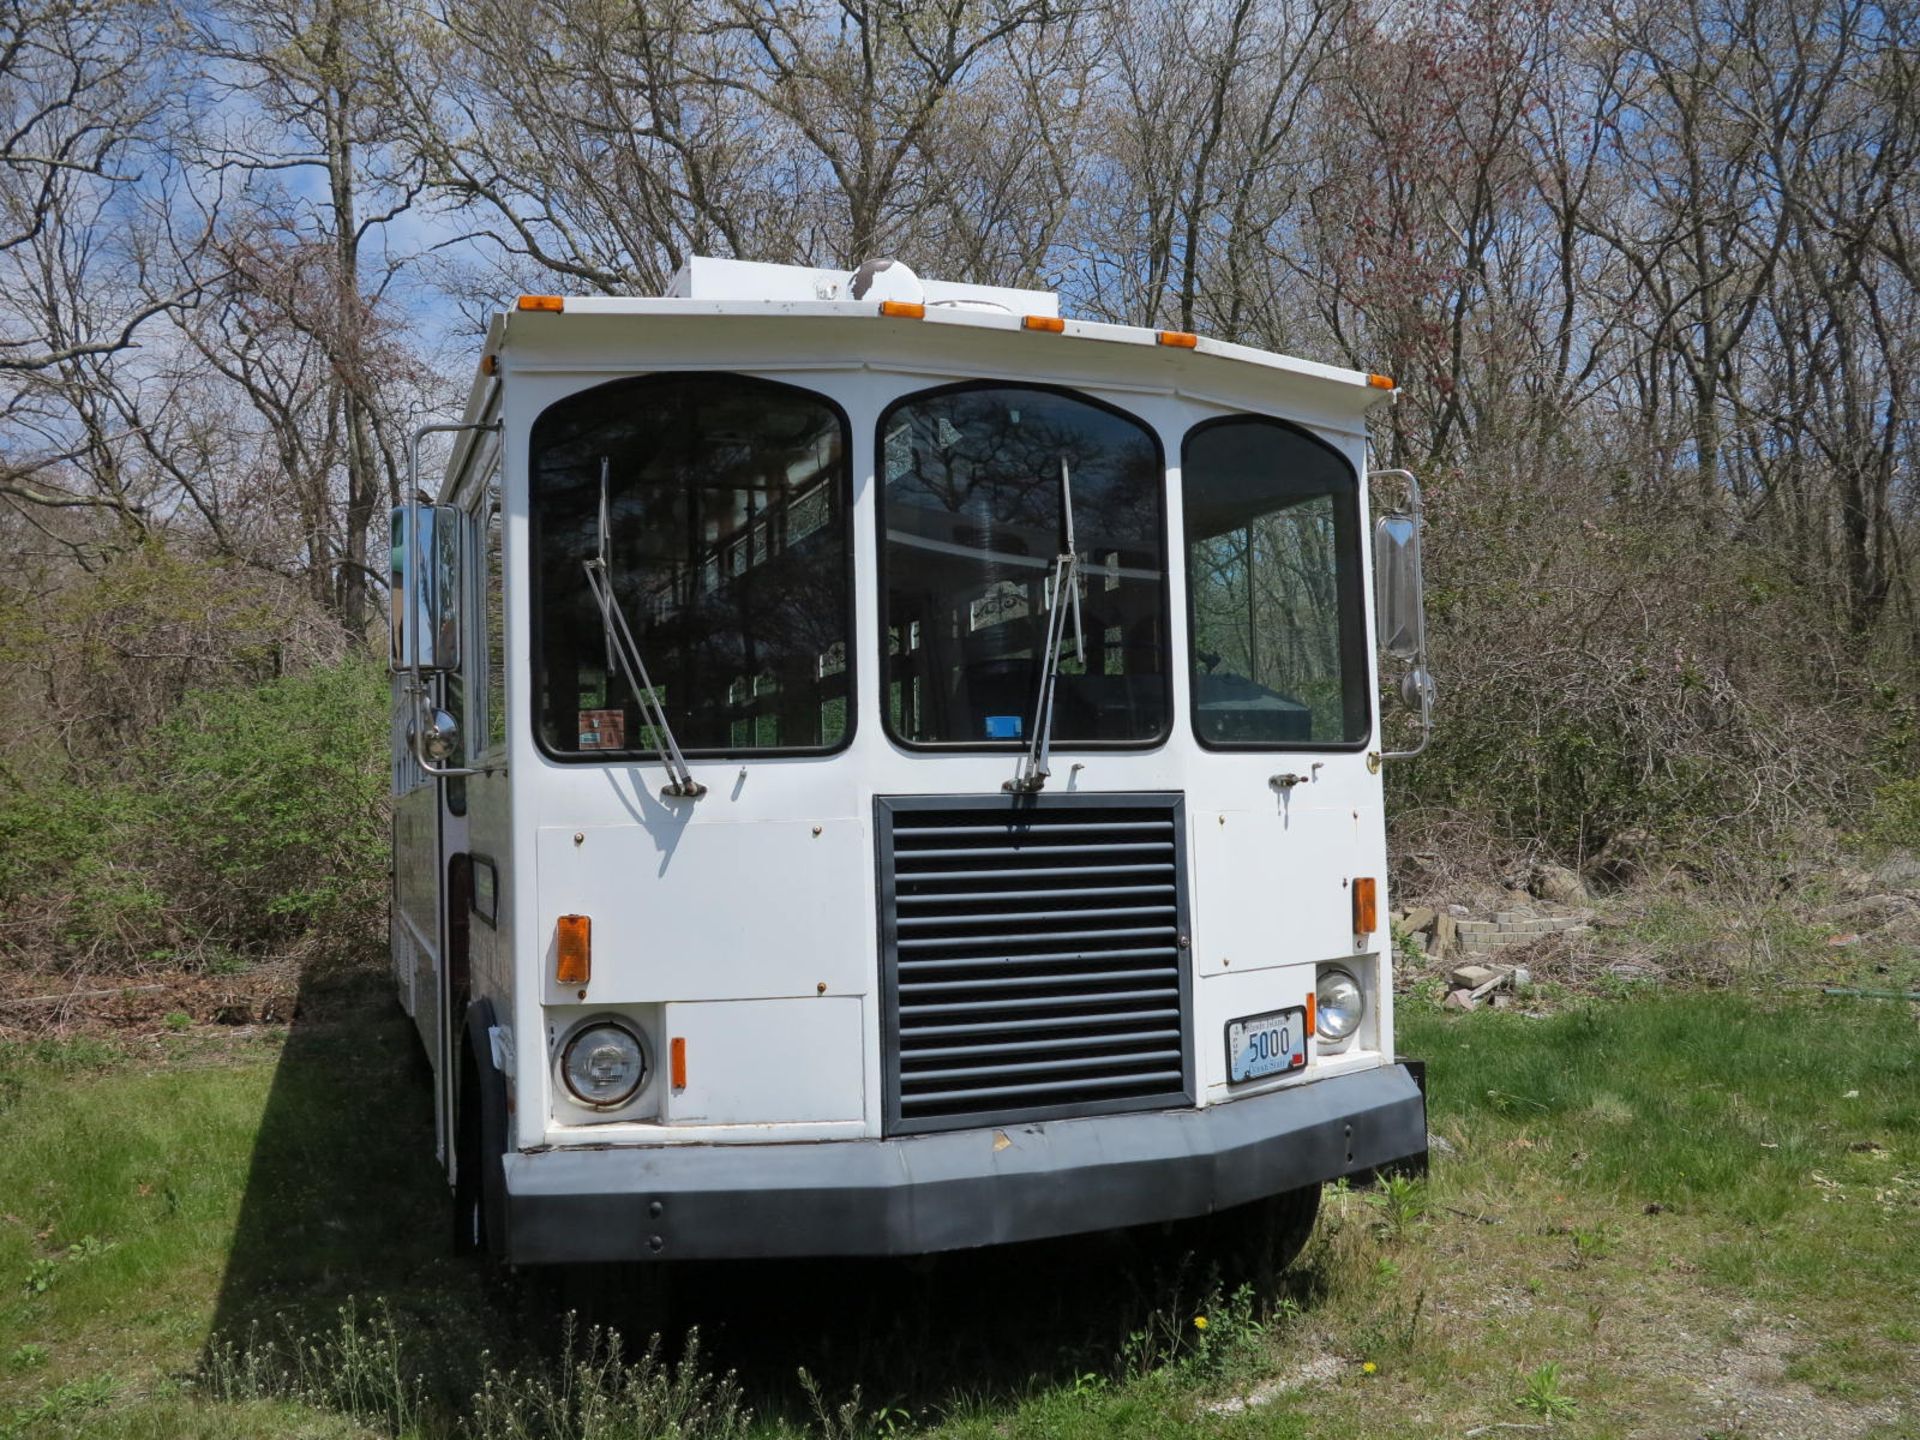 1986 Chevrolet P6000 Trolley - Image 4 of 8